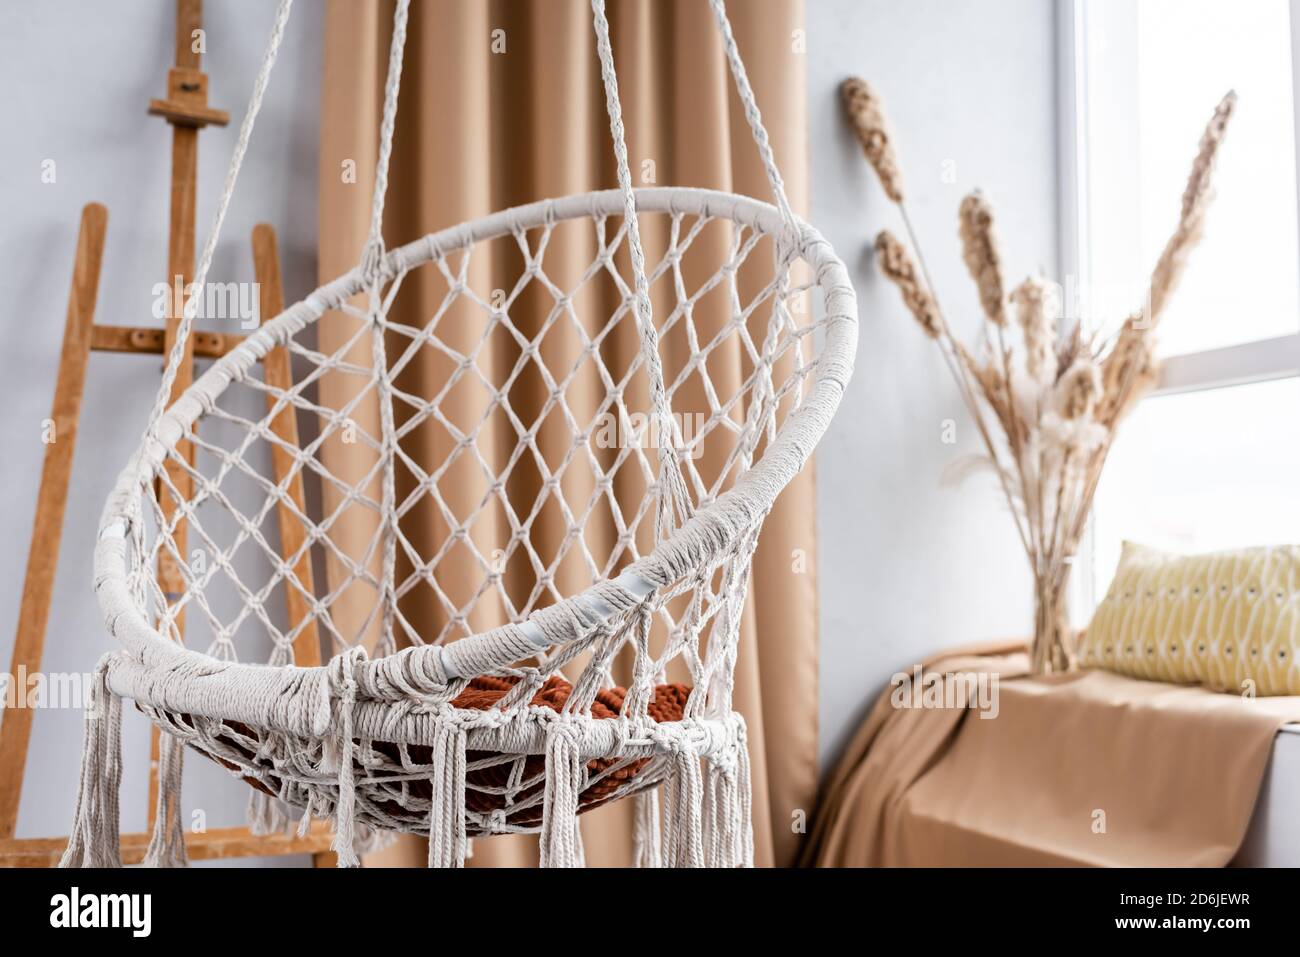 Modern studio interior with hanging chair and easel Stock Photo